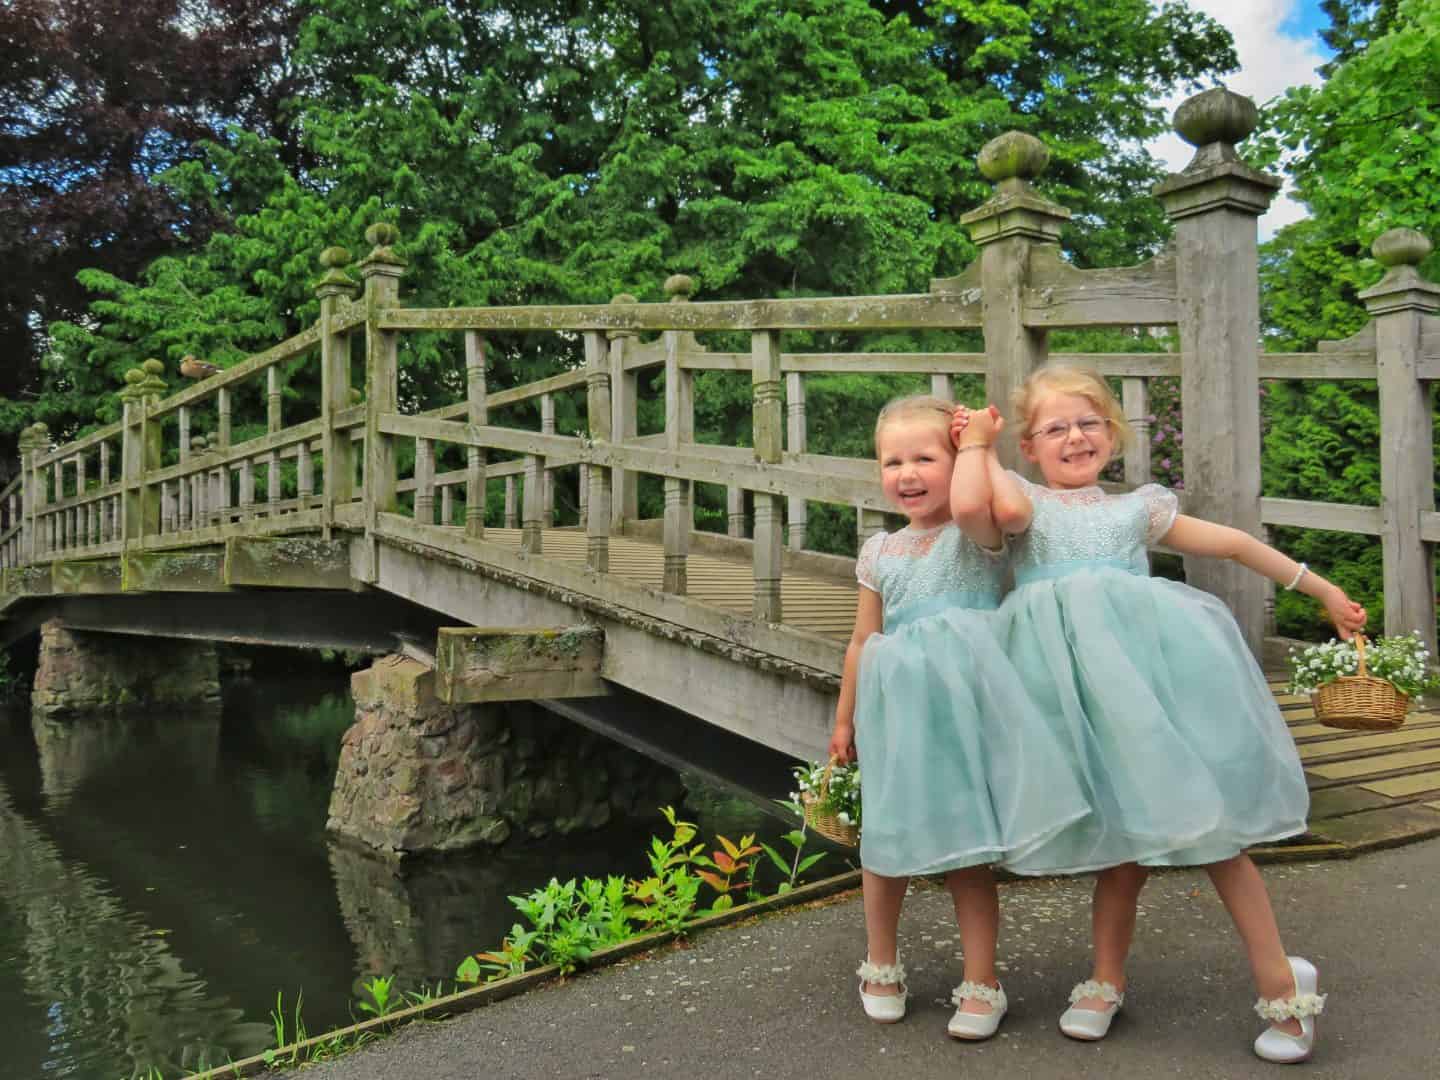 Two girls standing in front of the Priory Park bridge, a free park in Great Malvern